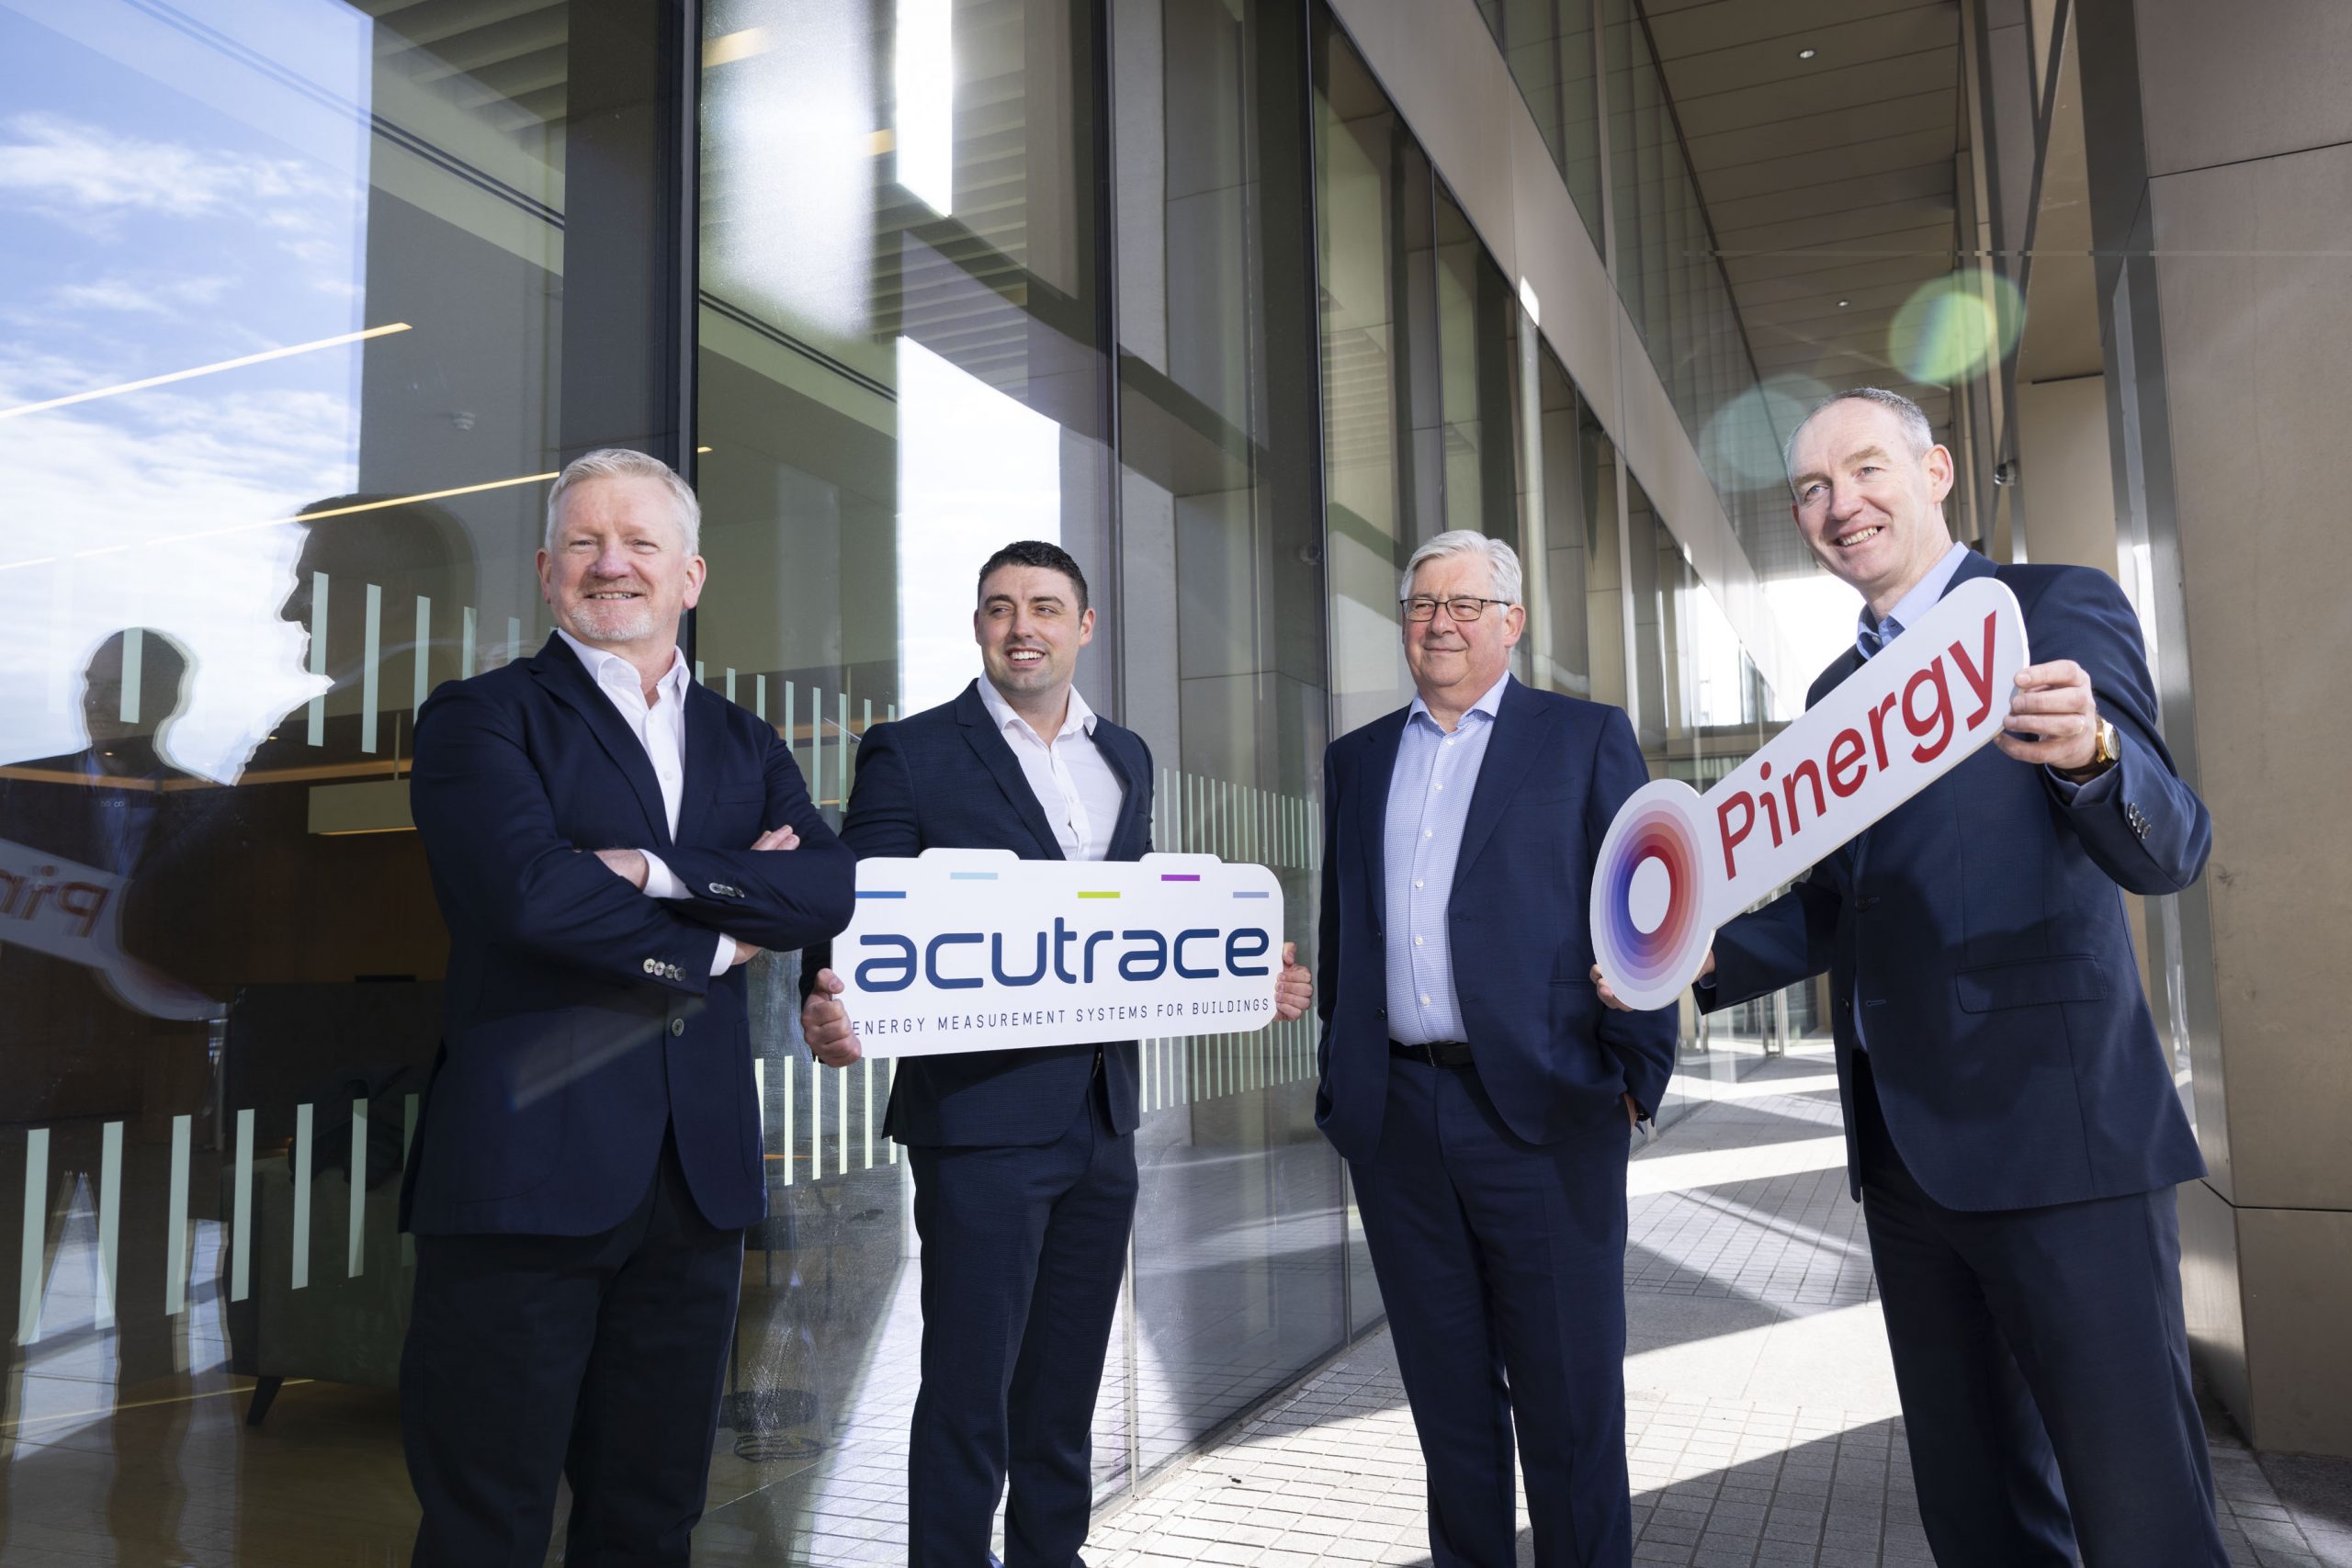 Pinergy acquires leading energy & utilities measurement solutions business, Acutrace